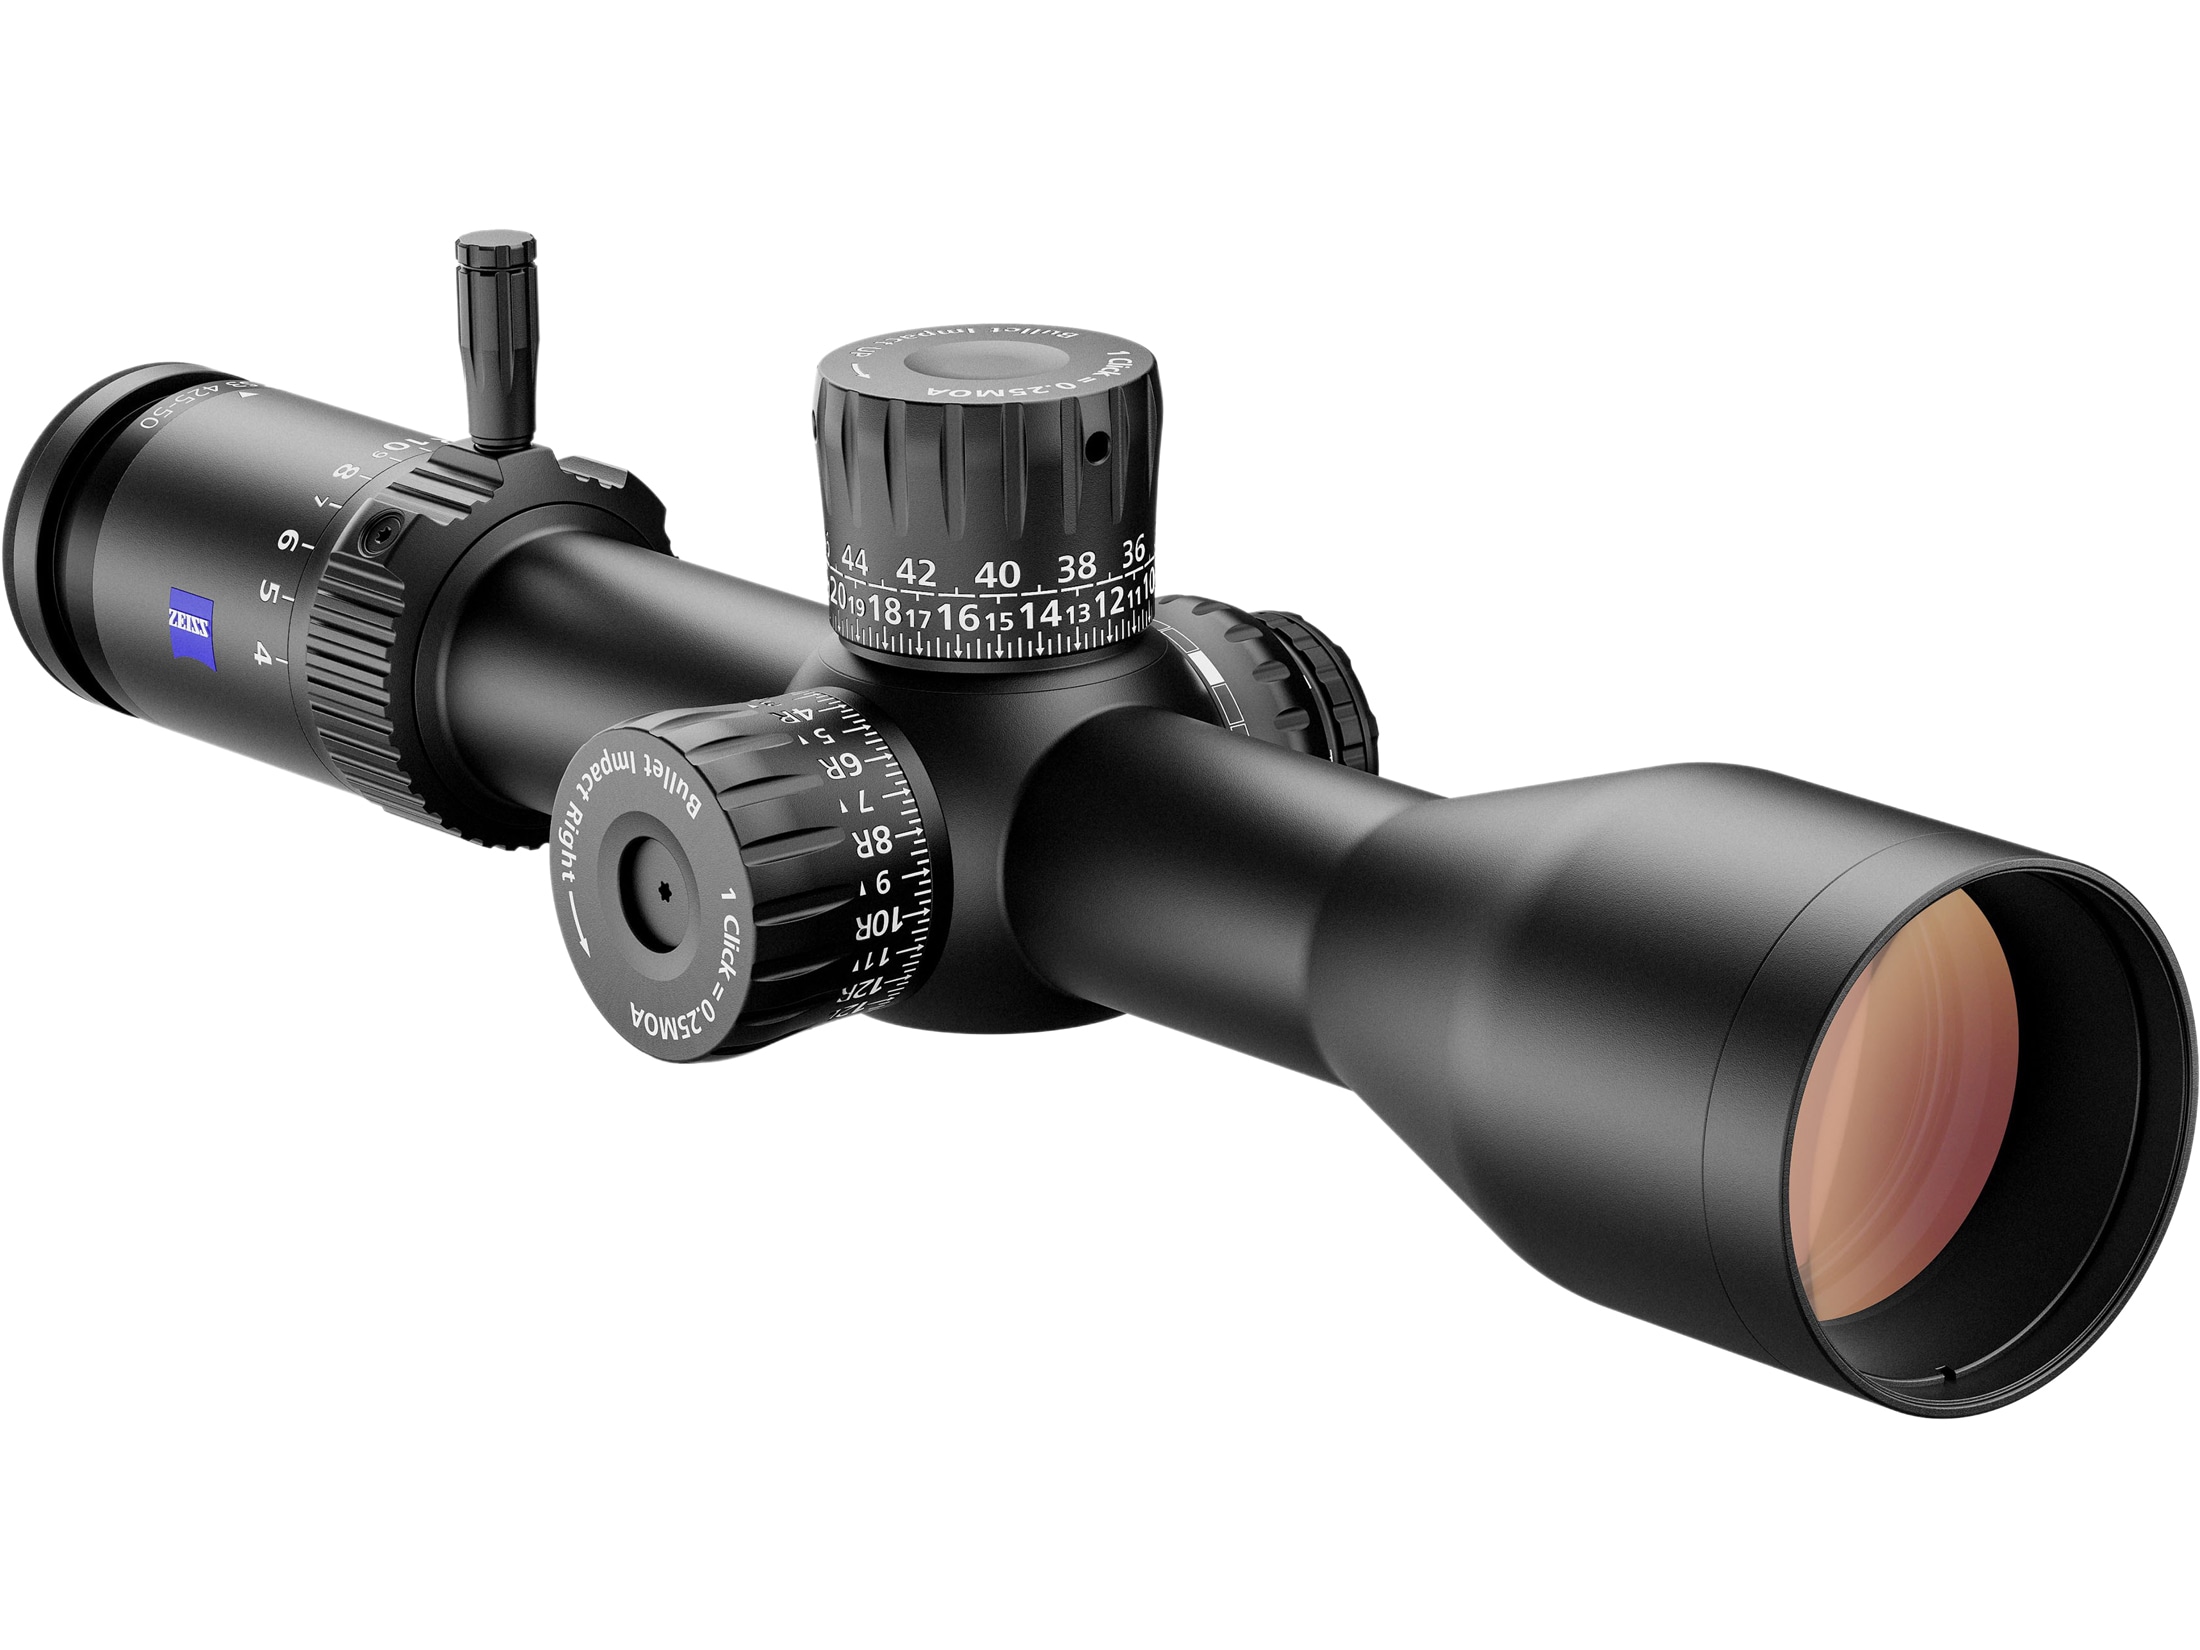 Zeiss LRP S3 Rifle Scope 34mm Tube 4-25x 50mm First Focal Plane Extended Turret with Ballistic Stop Illuminated Reticle Matte For Sale